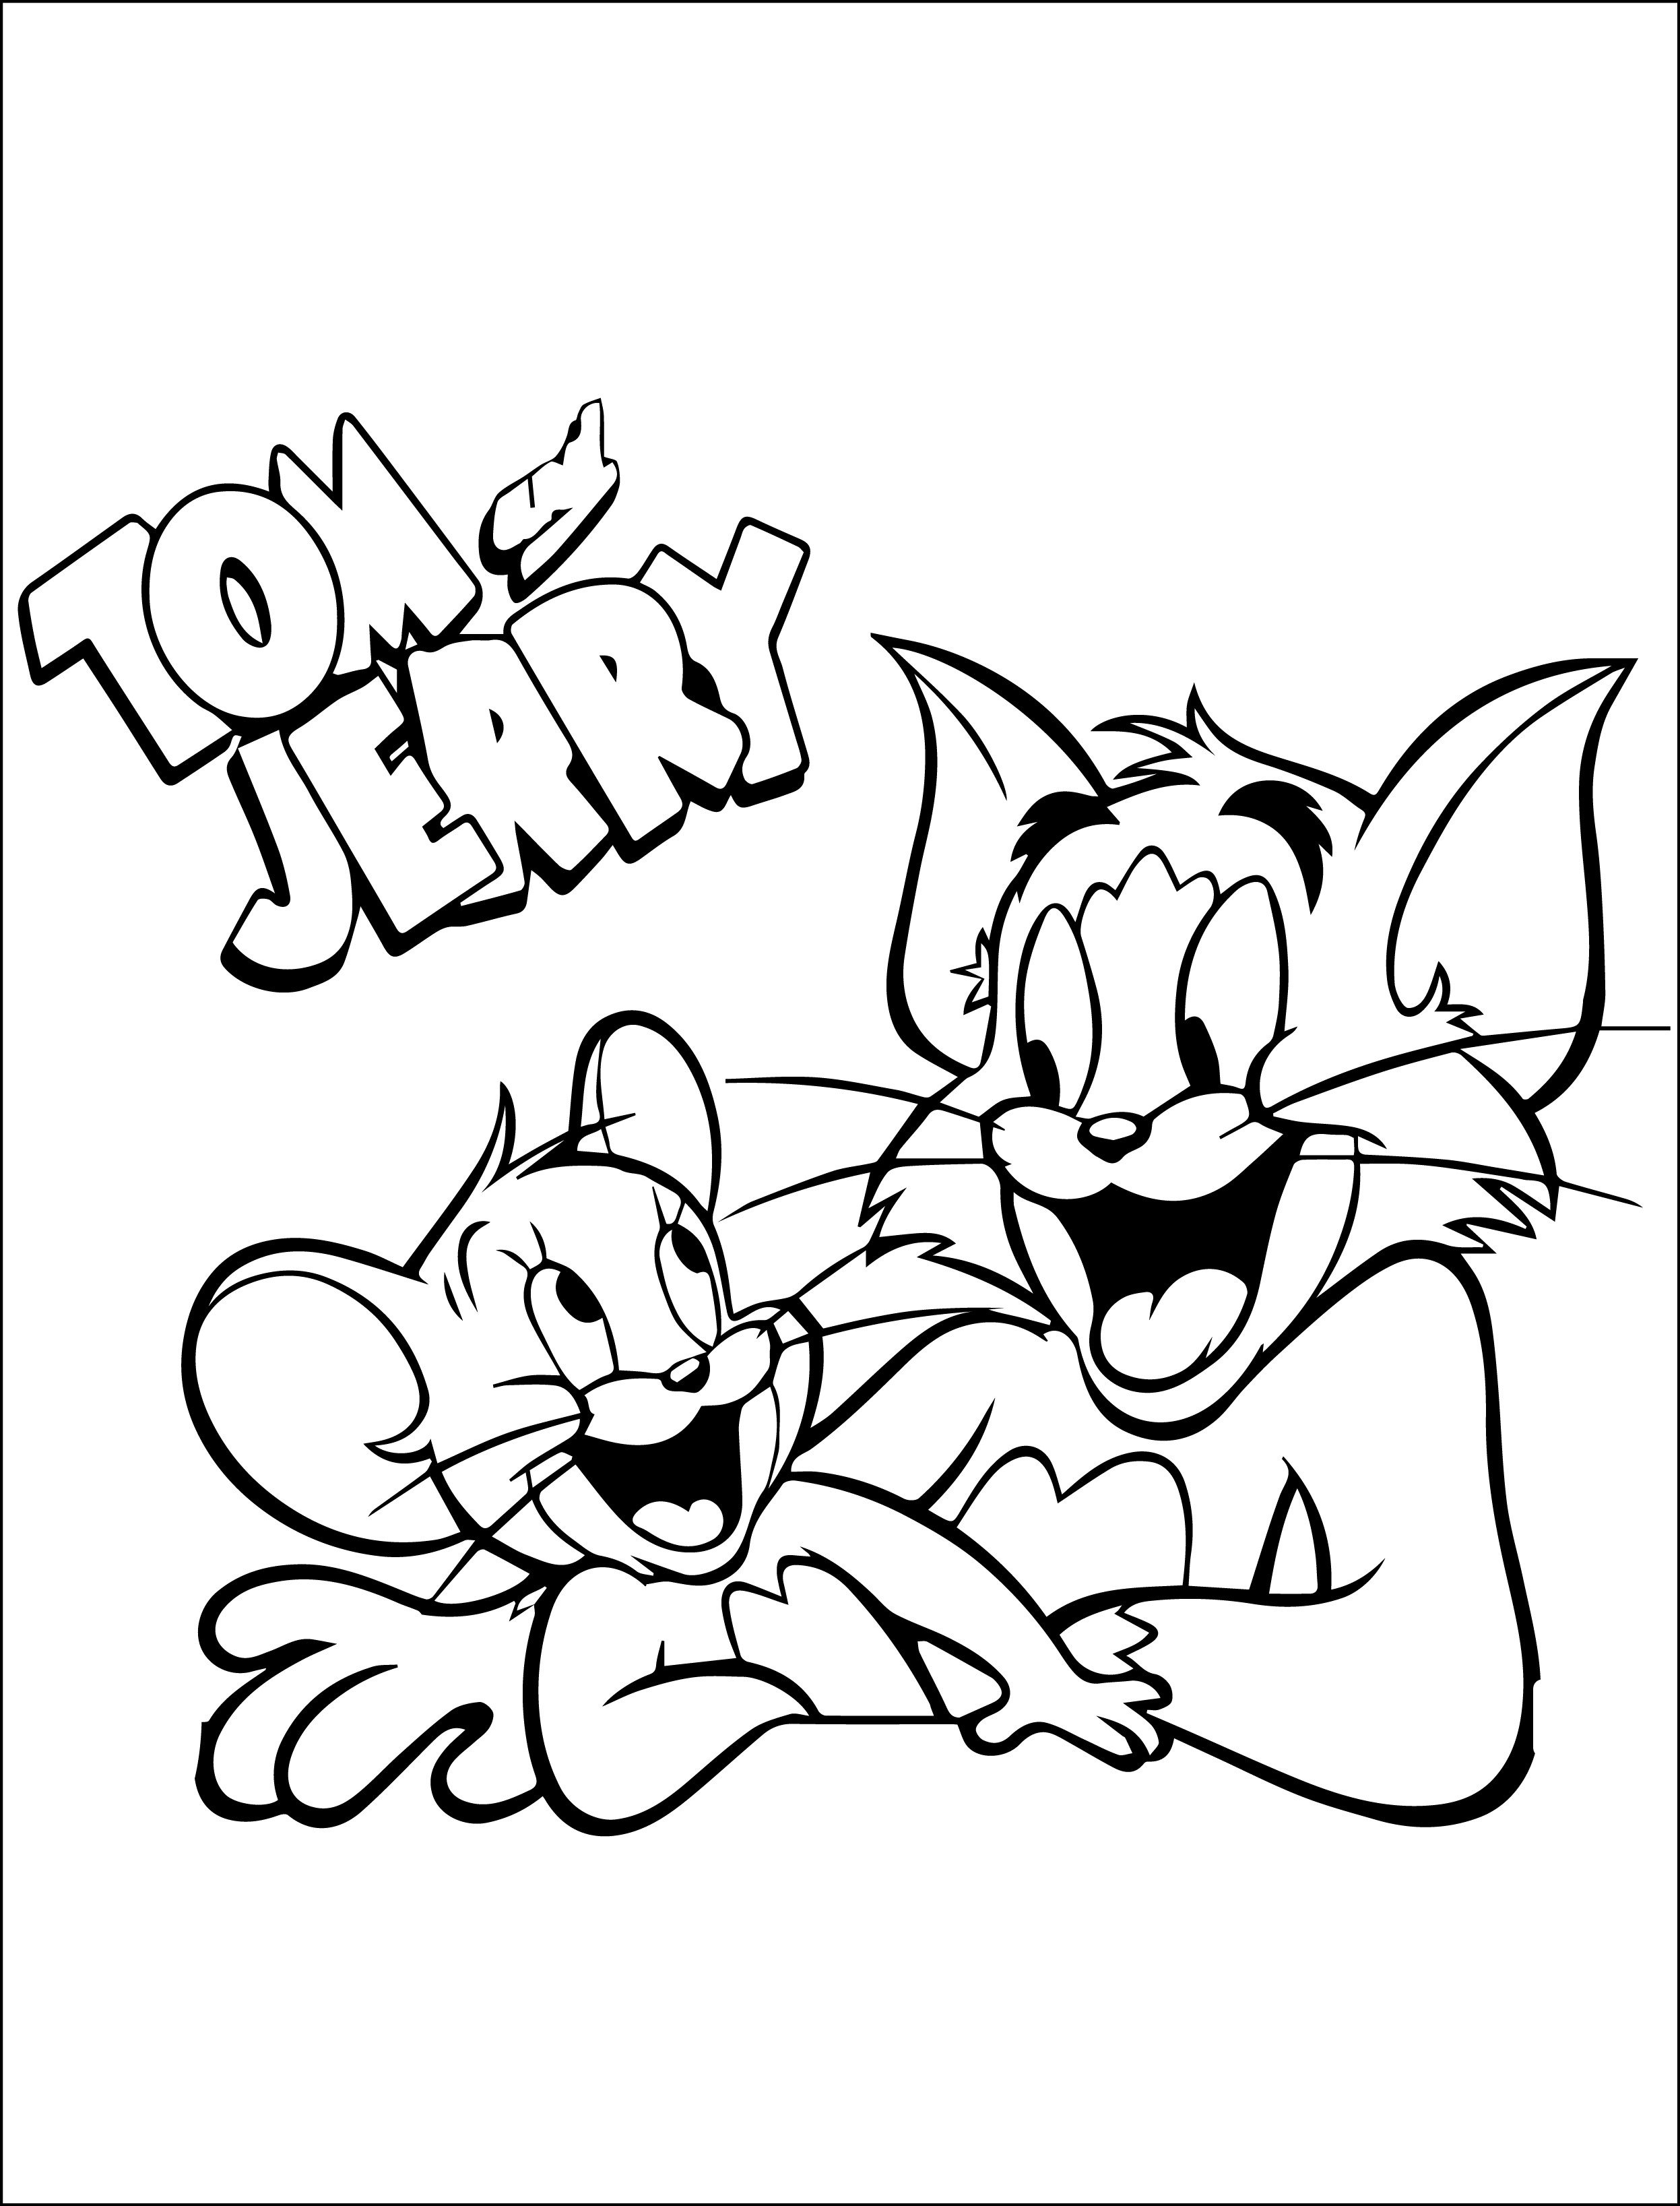 tom and jerry coloring pages - SheetalColor.com